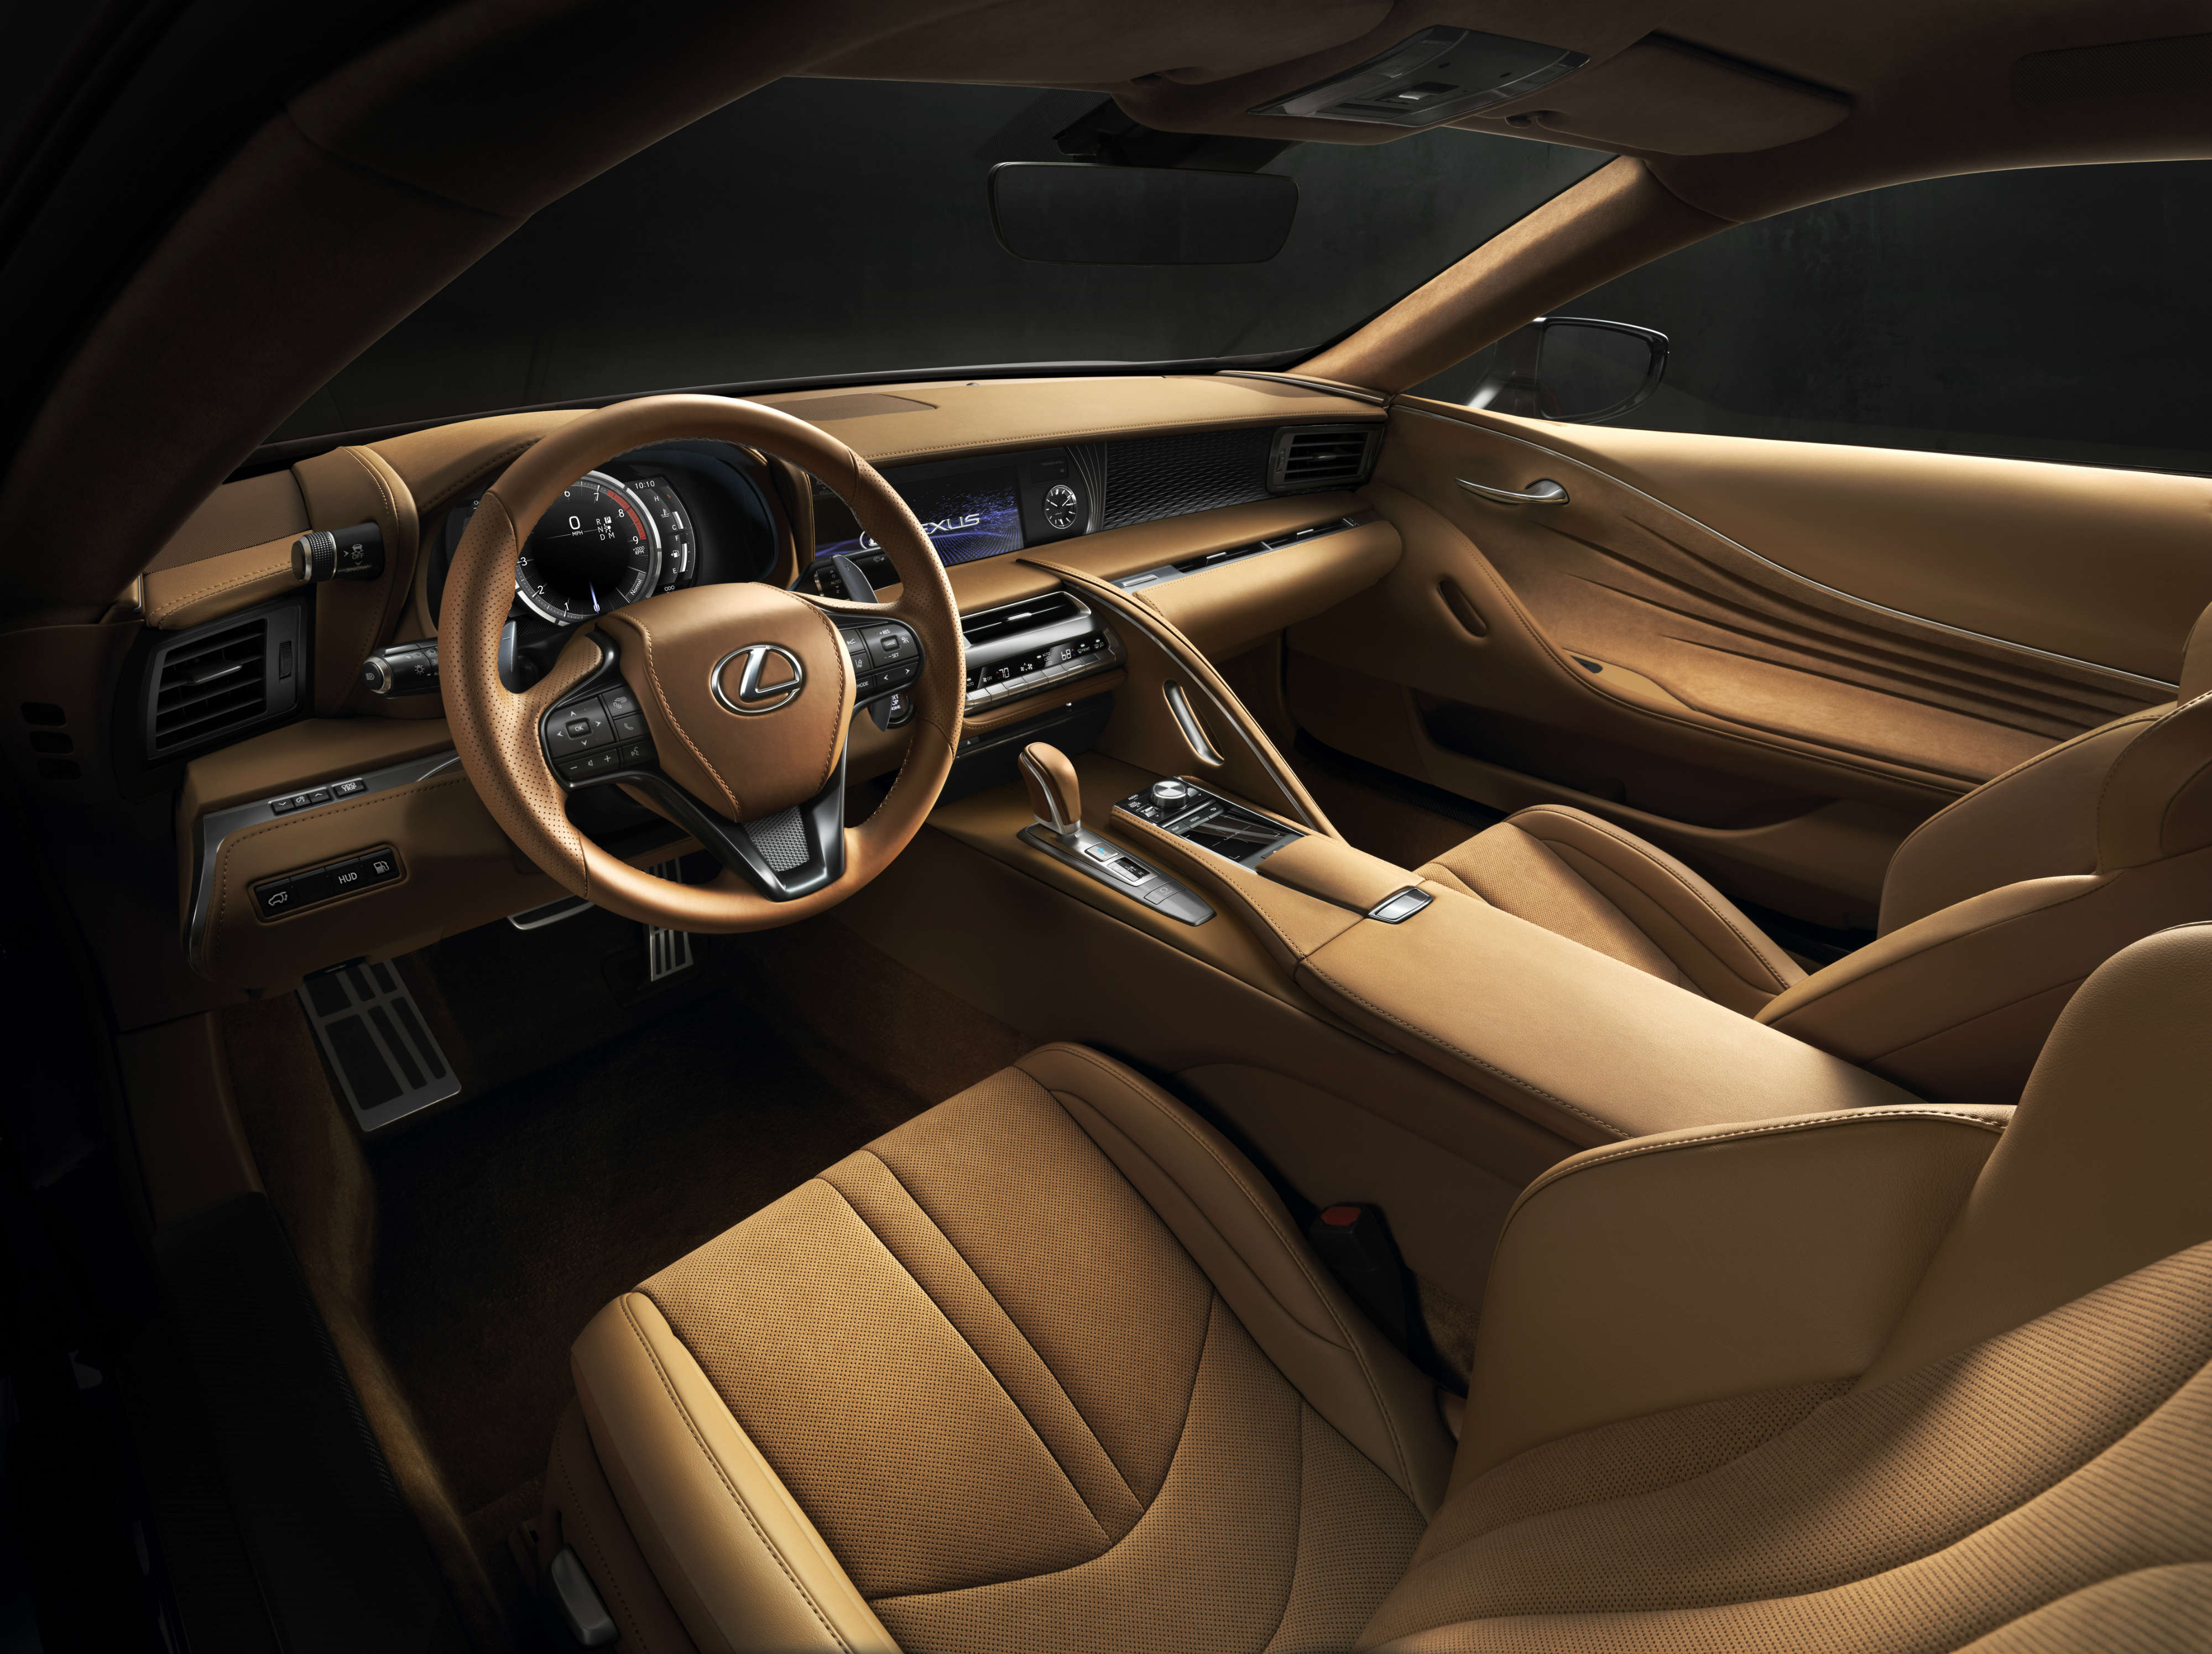 The 2+2 interior of the Lexus LC 500 sports car